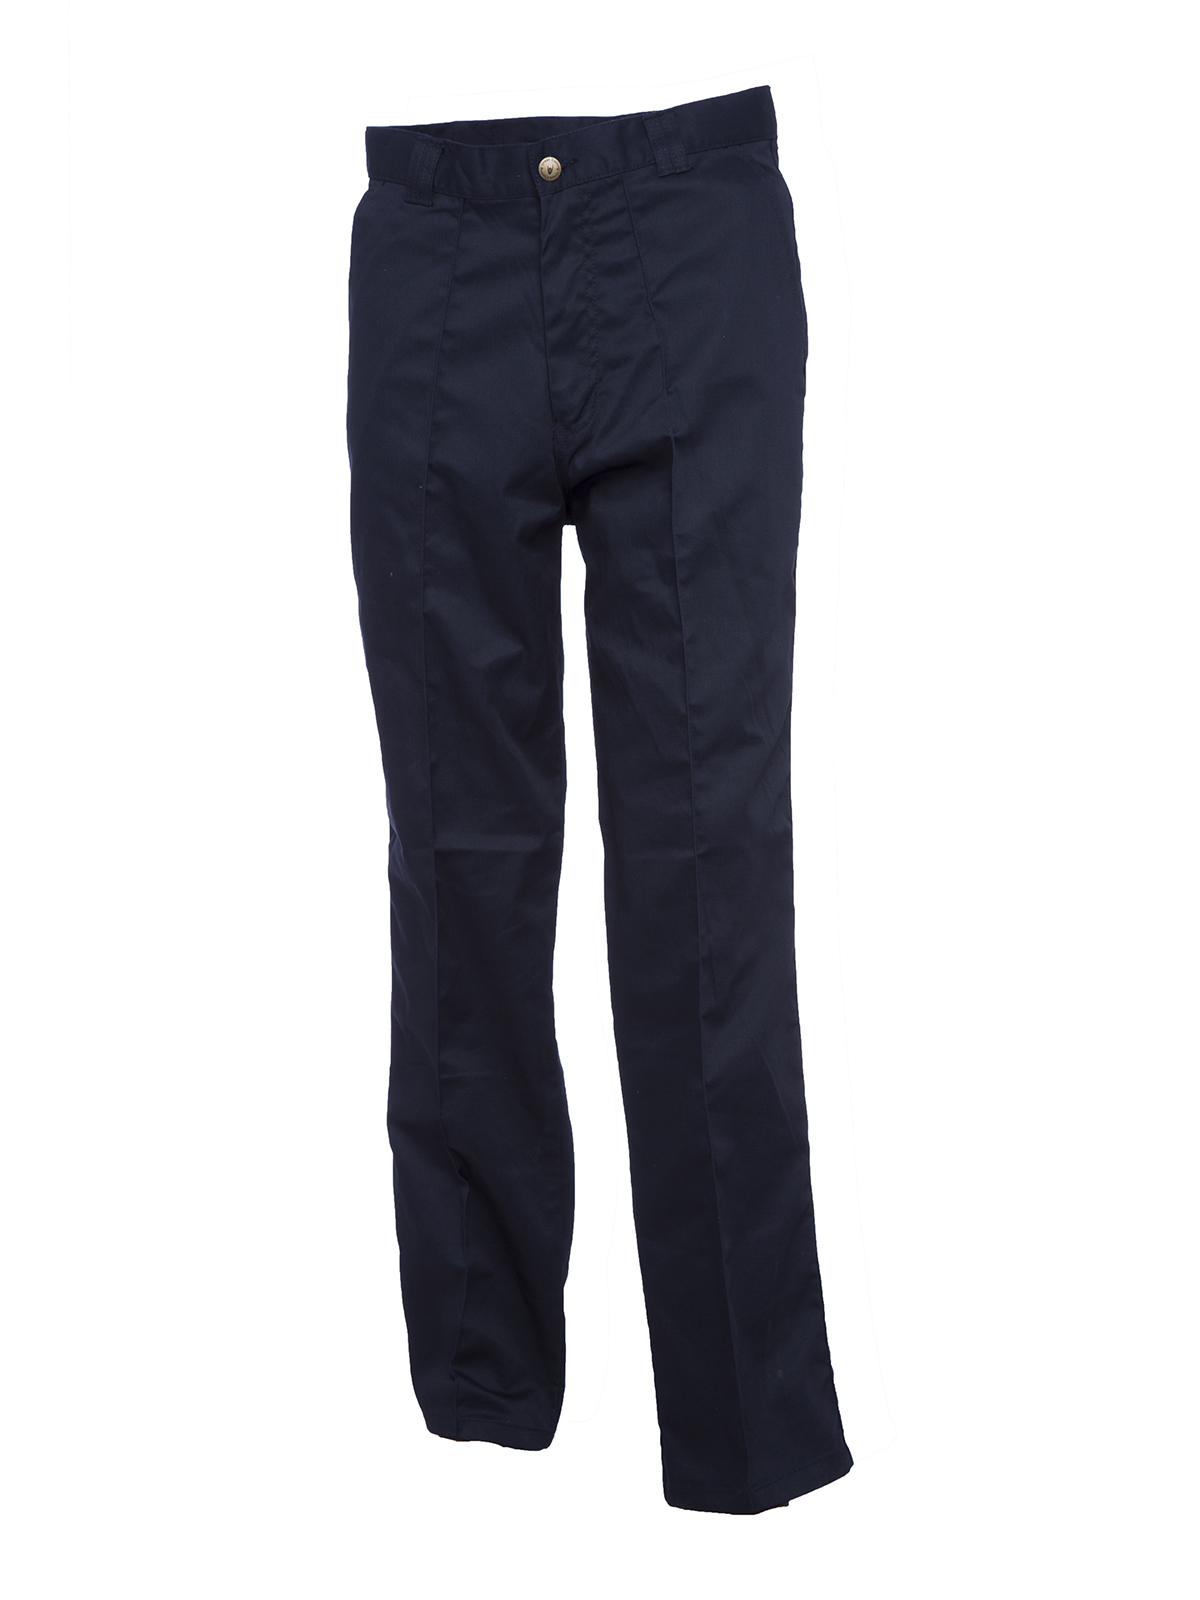 Workwear Trousers, Navy Blue - 32R